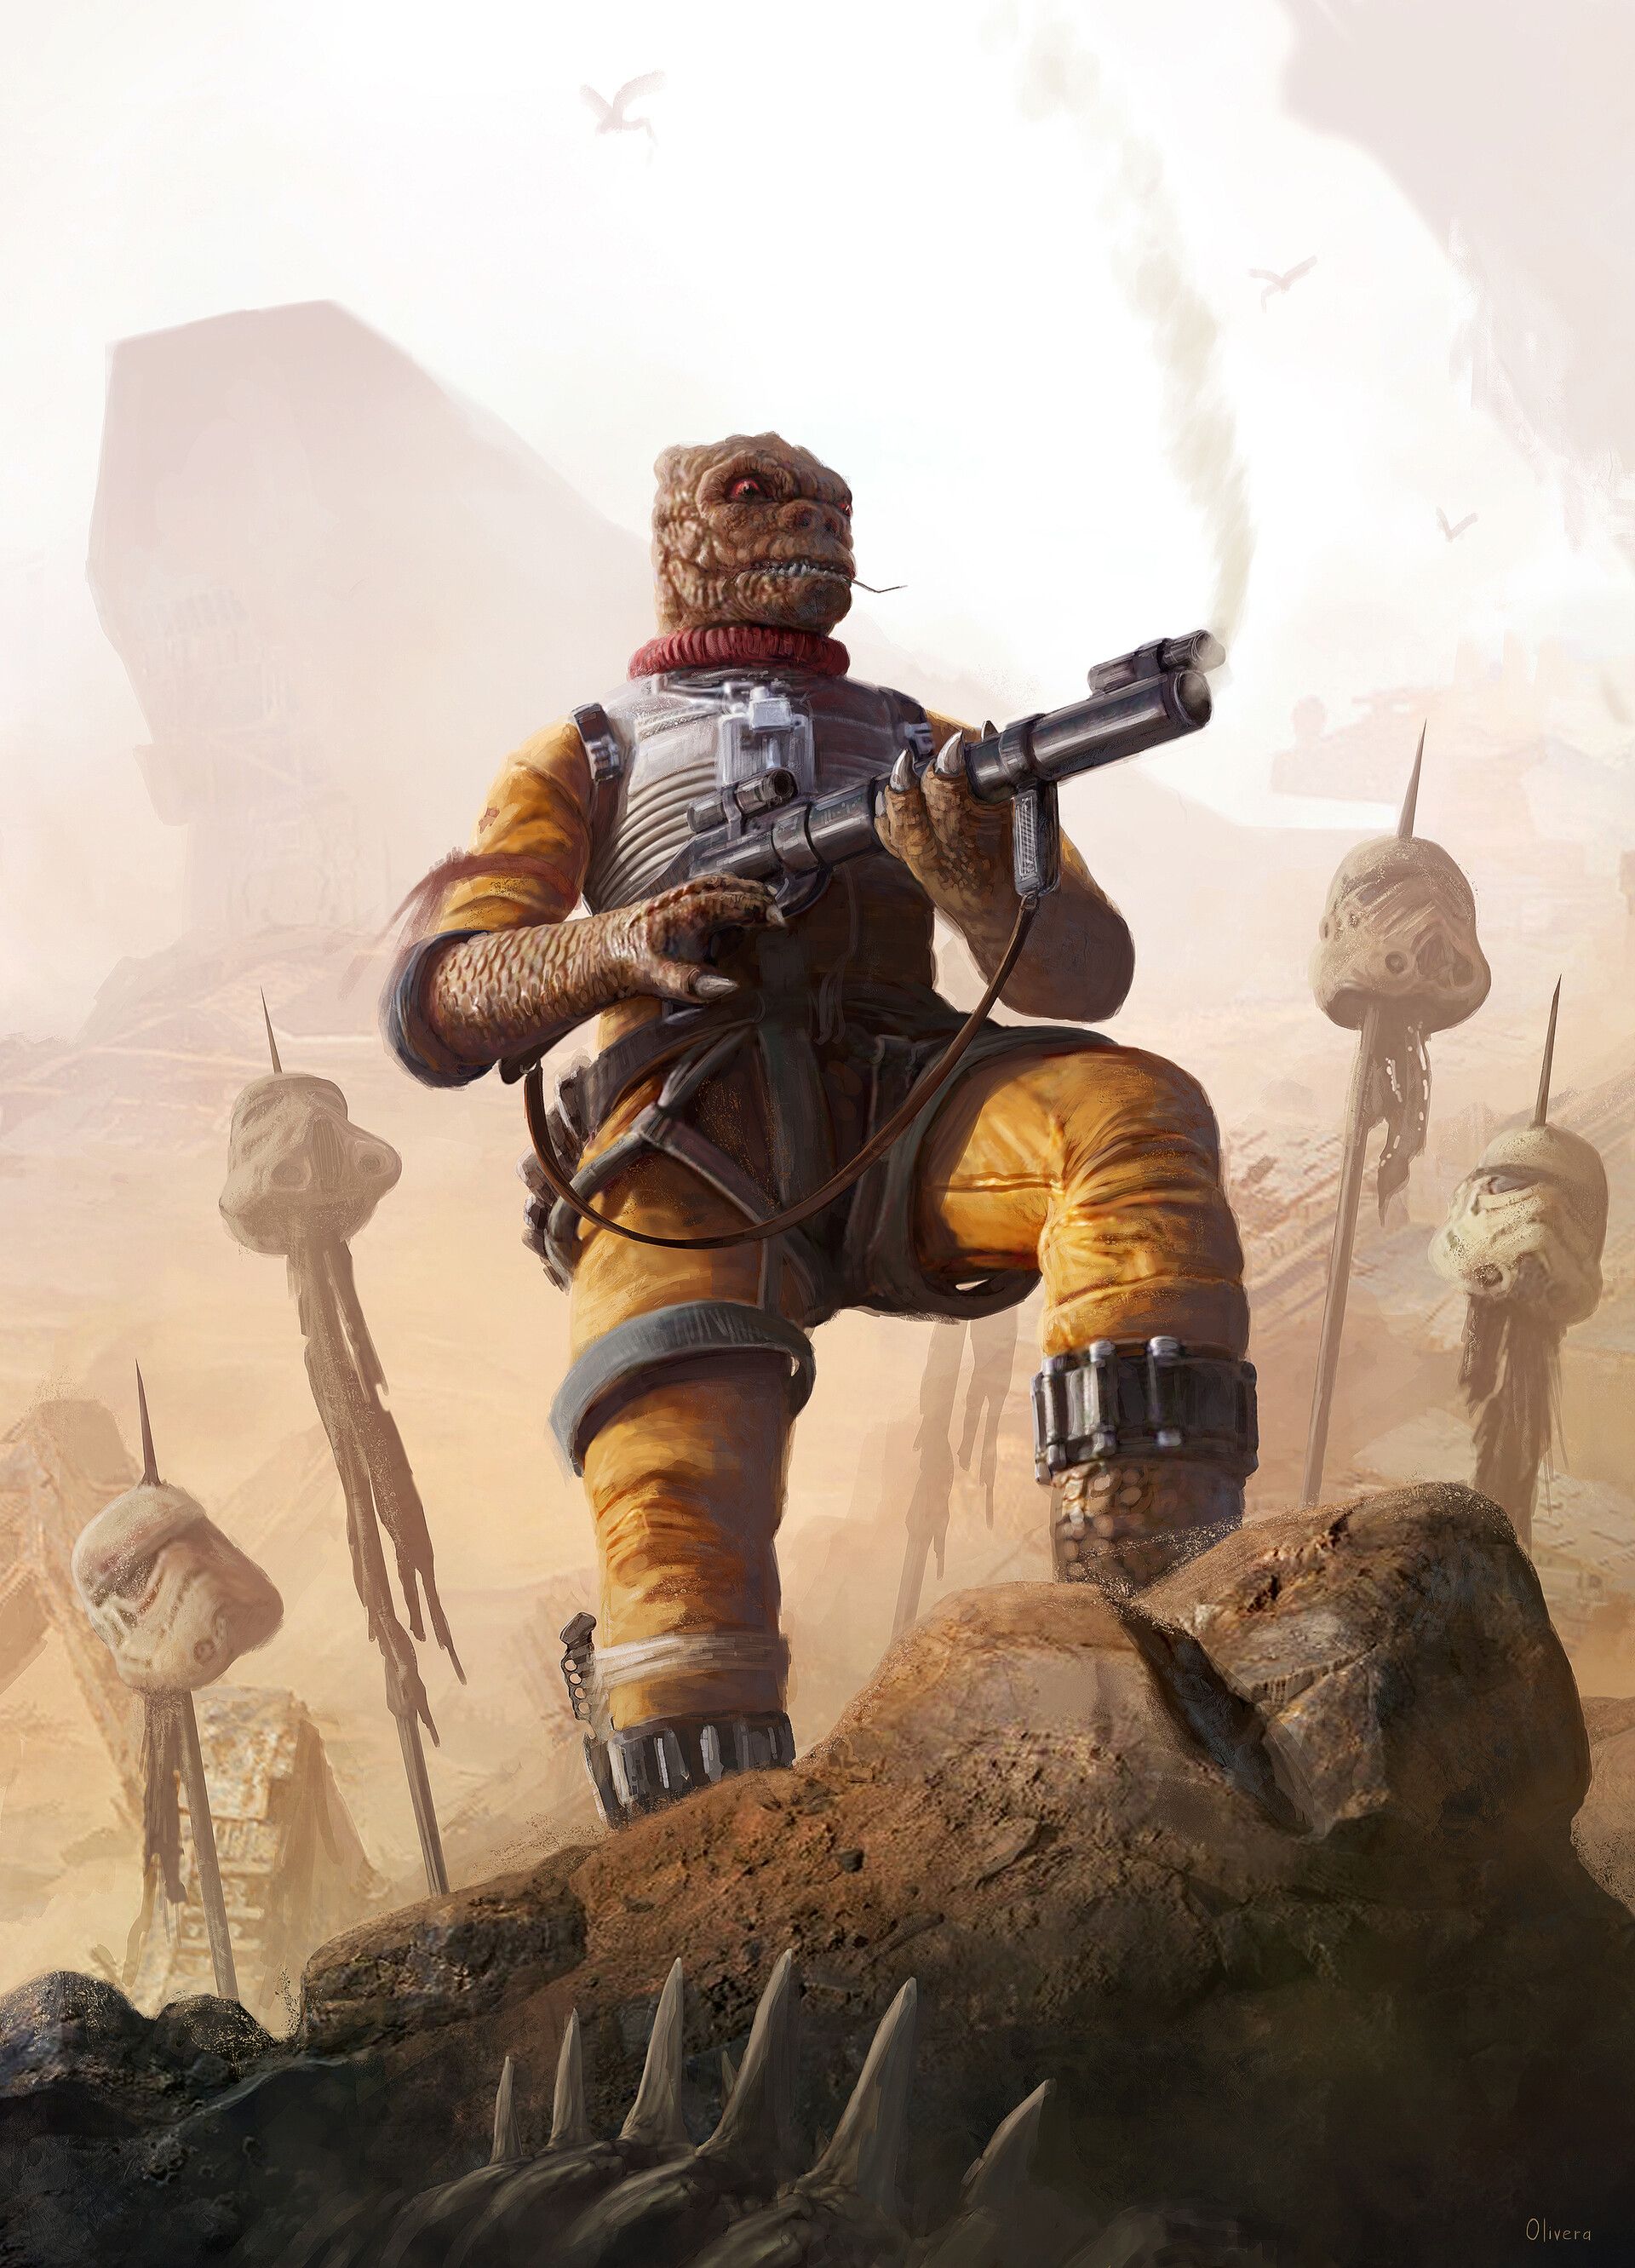 Bossk by Pablo Olivera. Star wars picture, Star wars characters